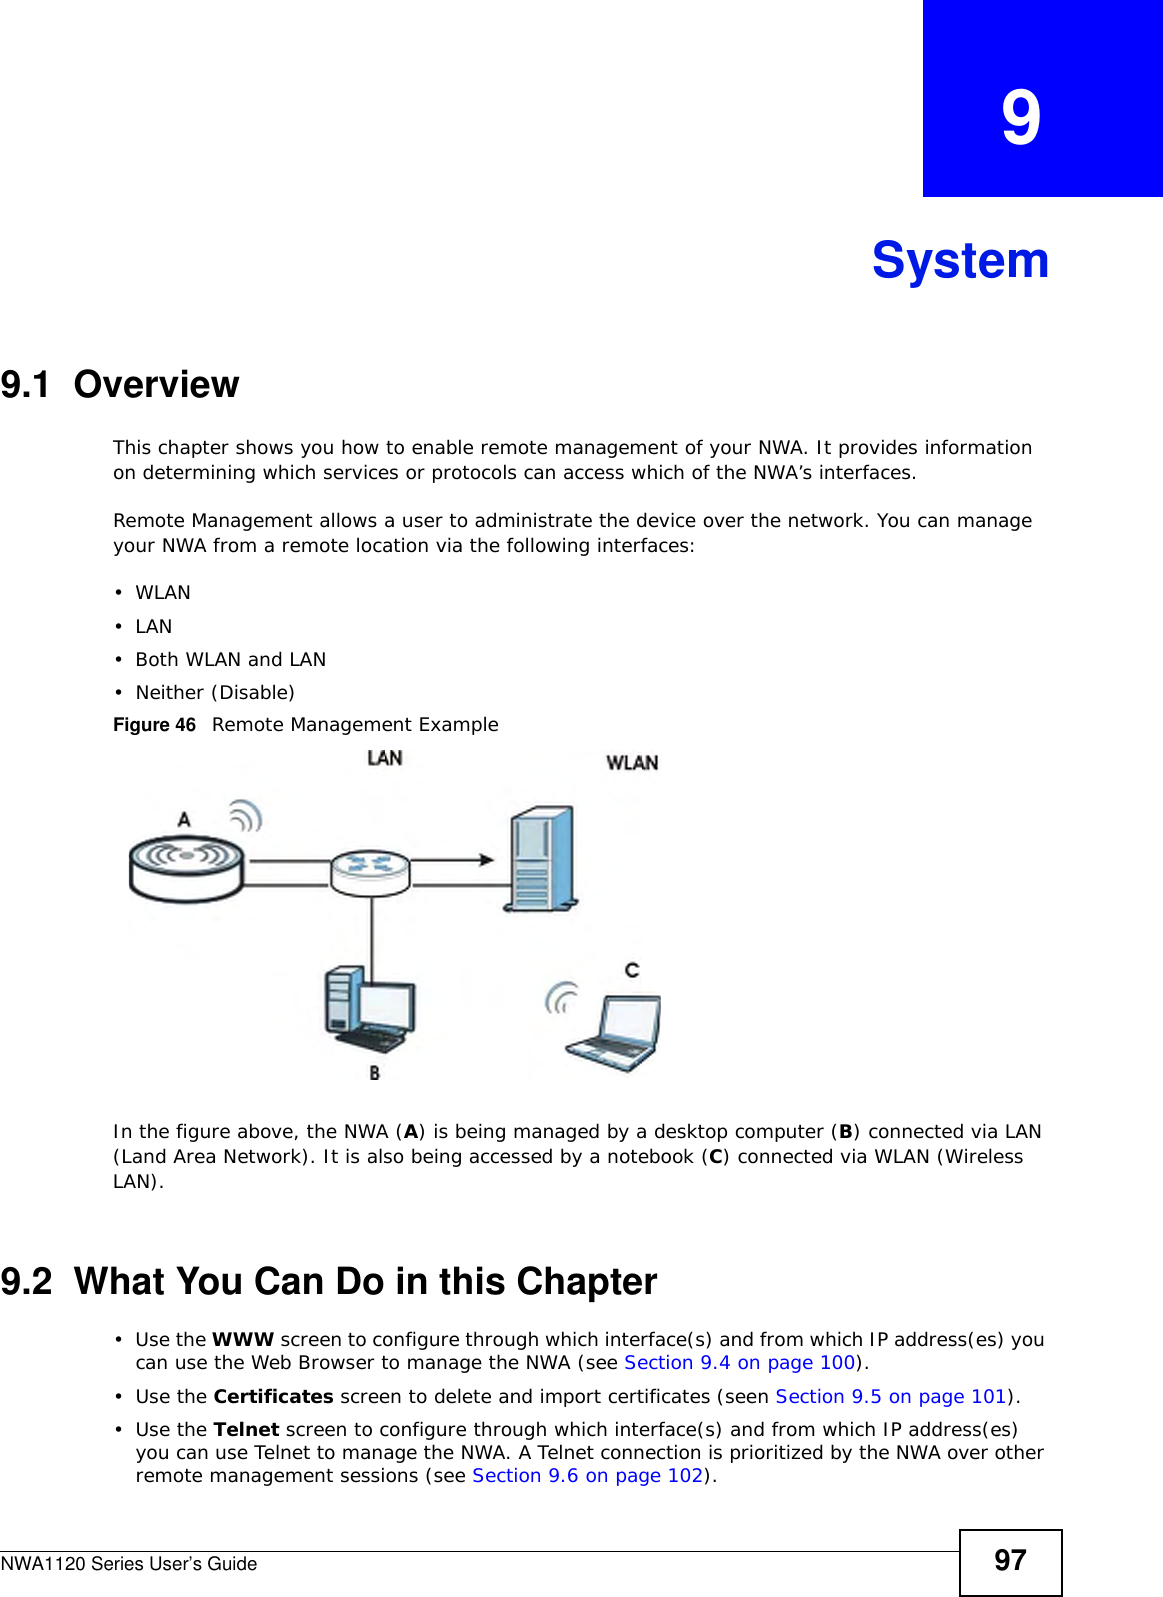 NWA1120 Series User’s Guide 97CHAPTER   9System9.1  OverviewThis chapter shows you how to enable remote management of your NWA. It provides information on determining which services or protocols can access which of the NWA’s interfaces.Remote Management allows a user to administrate the device over the network. You can manage your NWA from a remote location via the following interfaces:•WLAN•LAN•Both WLAN and LAN• Neither (Disable)Figure 46   Remote Management ExampleIn the figure above, the NWA (A) is being managed by a desktop computer (B) connected via LAN (Land Area Network). It is also being accessed by a notebook (C) connected via WLAN (Wireless LAN).9.2  What You Can Do in this Chapter•Use the WWW screen to configure through which interface(s) and from which IP address(es) you can use the Web Browser to manage the NWA (see Section 9.4 on page 100). •Use the Certificates screen to delete and import certificates (seen Section 9.5 on page 101).•Use the Telnet screen to configure through which interface(s) and from which IP address(es) you can use Telnet to manage the NWA. A Telnet connection is prioritized by the NWA over other remote management sessions (see Section 9.6 on page 102). 